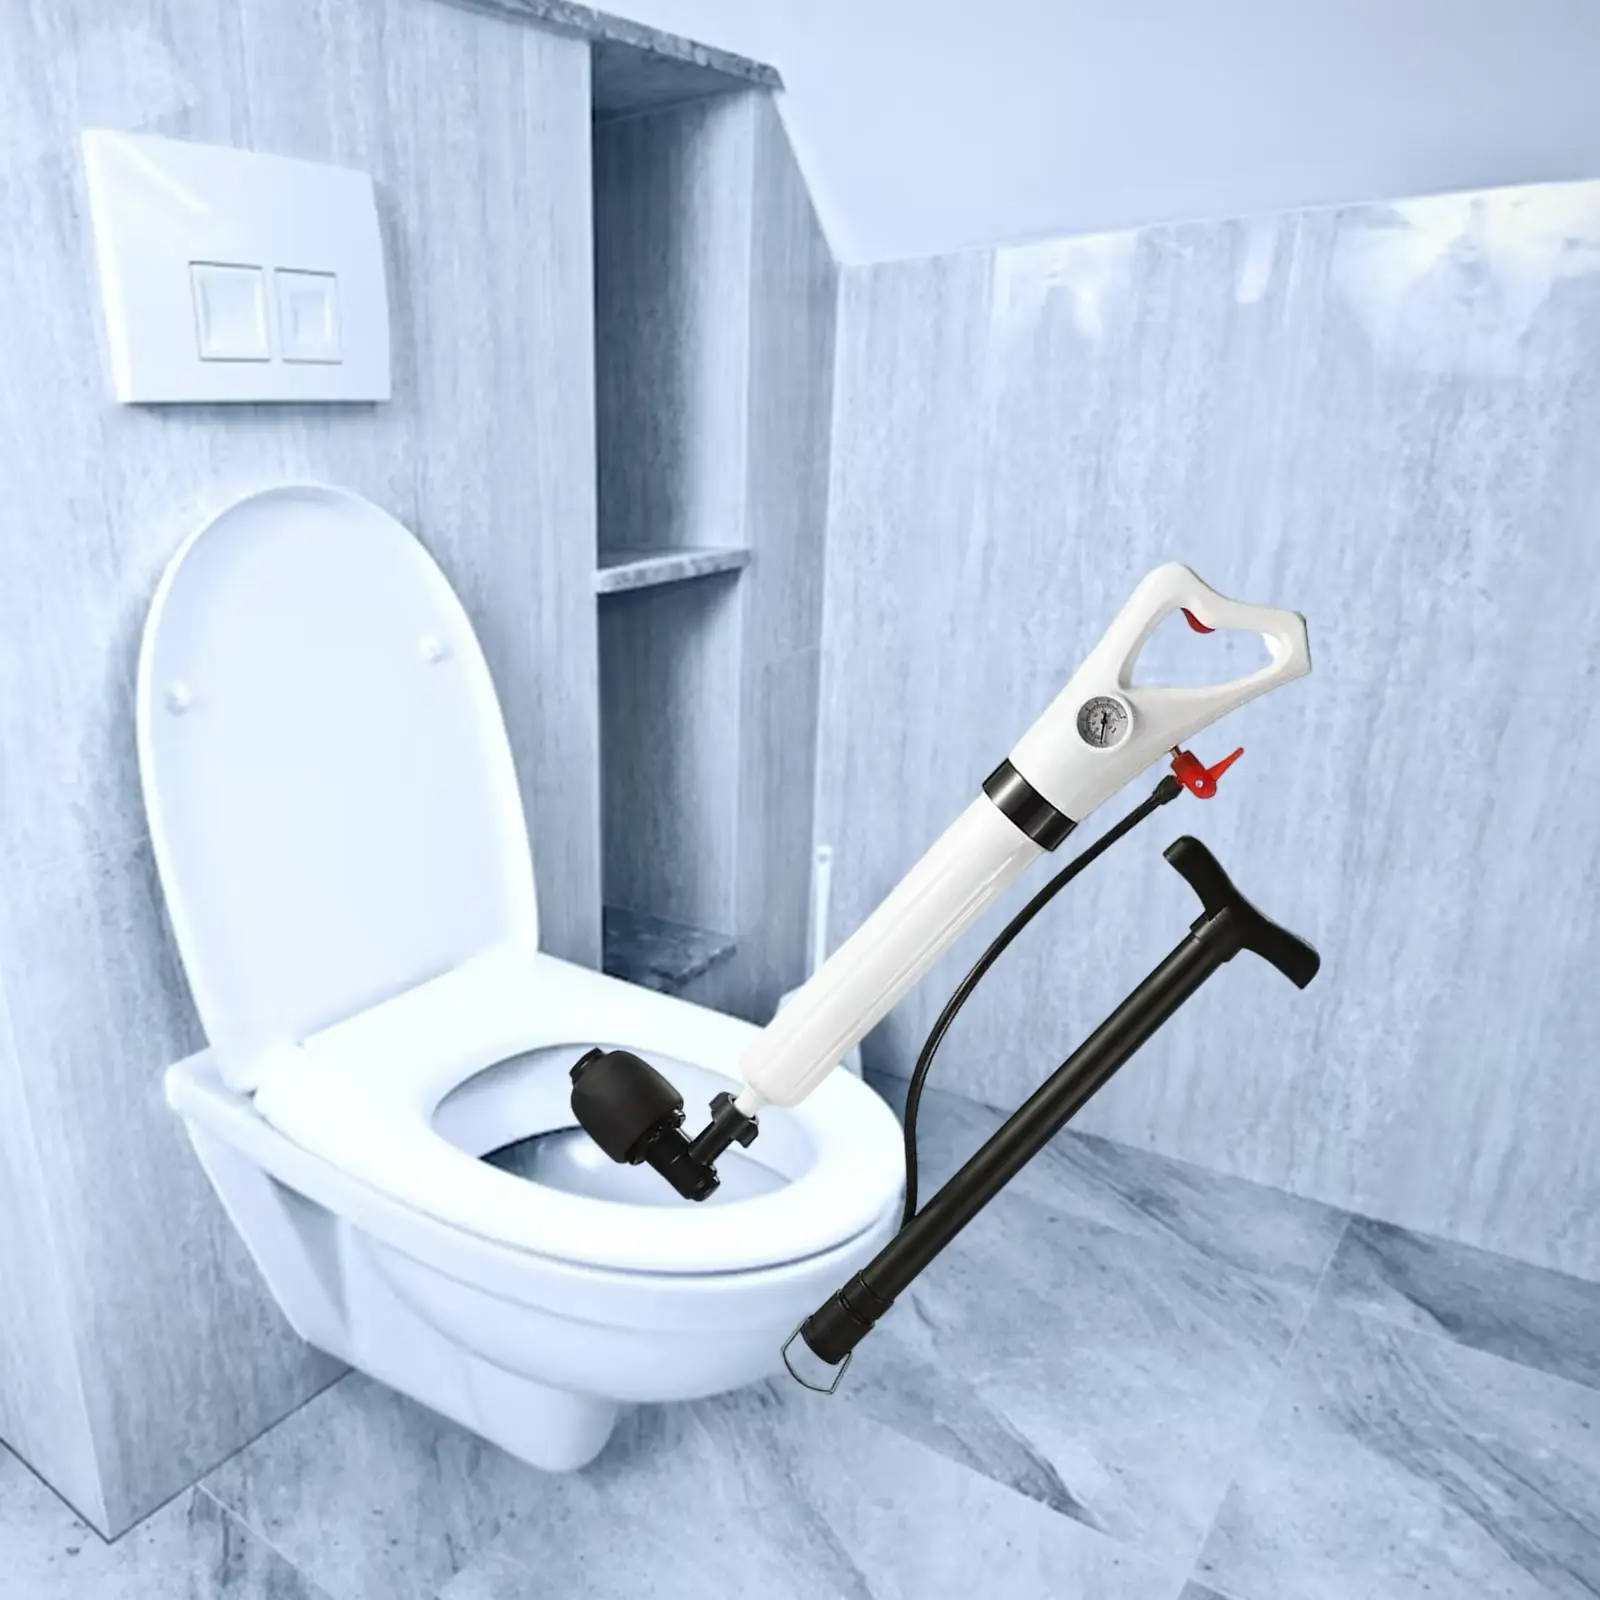 Toilet Plunger set Air power Plumbing Tools Manual Powerful for Bathroom Bath Clogged Pipe Squat